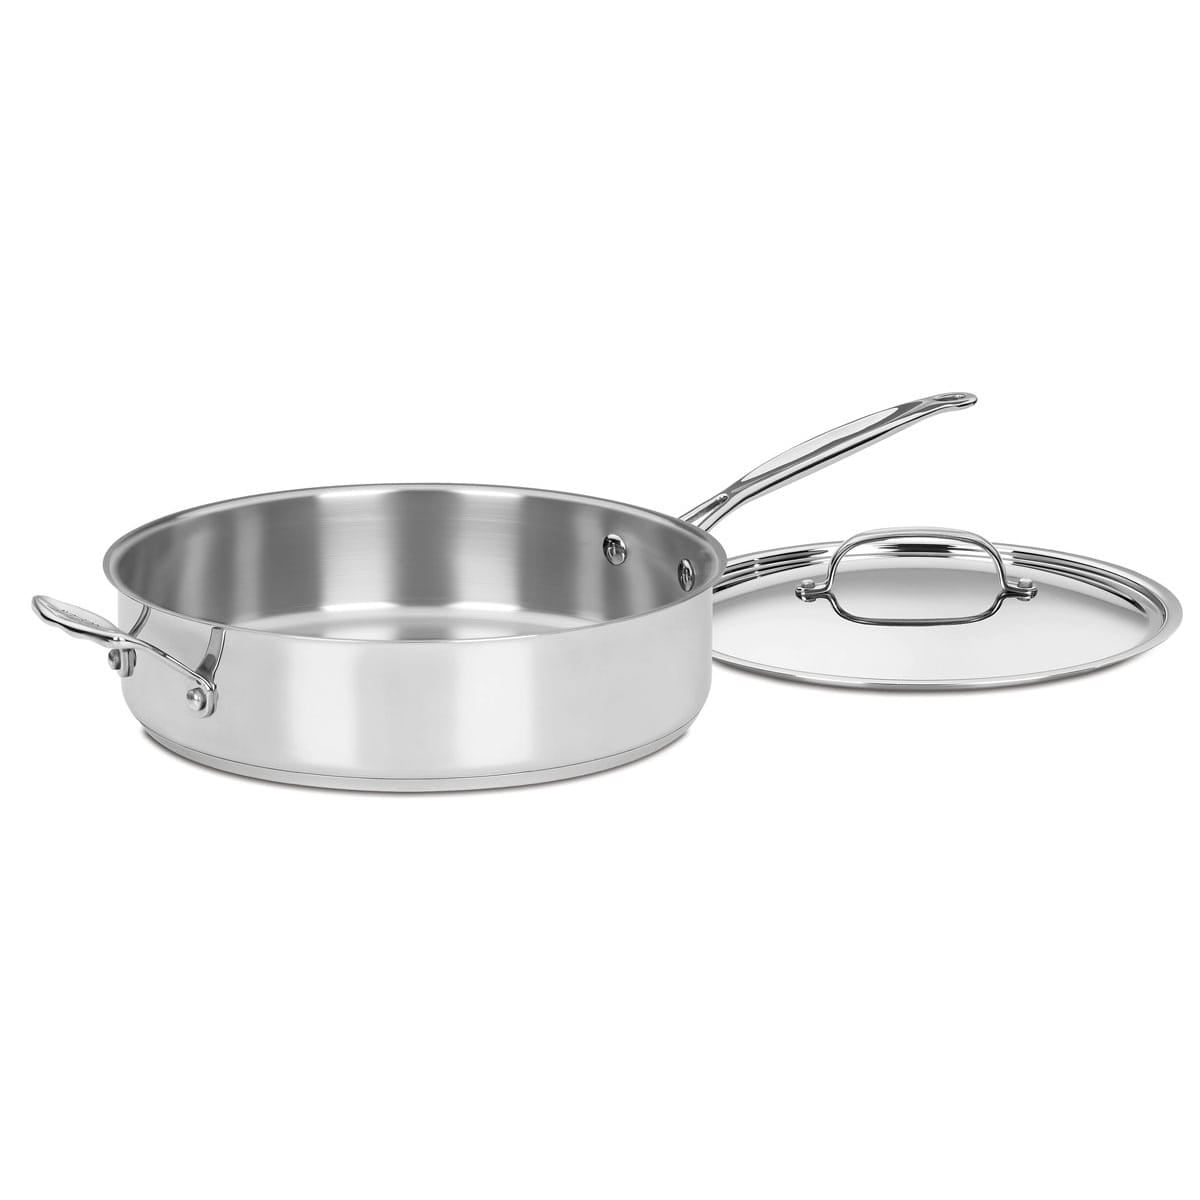 https://ak1.ostkcdn.com/images/products/is/images/direct/d347a5e8a5ff9eca536b3a36e3ac2ed430831af1/Cuisinart-733-30H-Chef%27s-Classic-Stainless-5-1-2-Quart-Saute-Pan-with-Helper-Handle-and-Cover.jpg